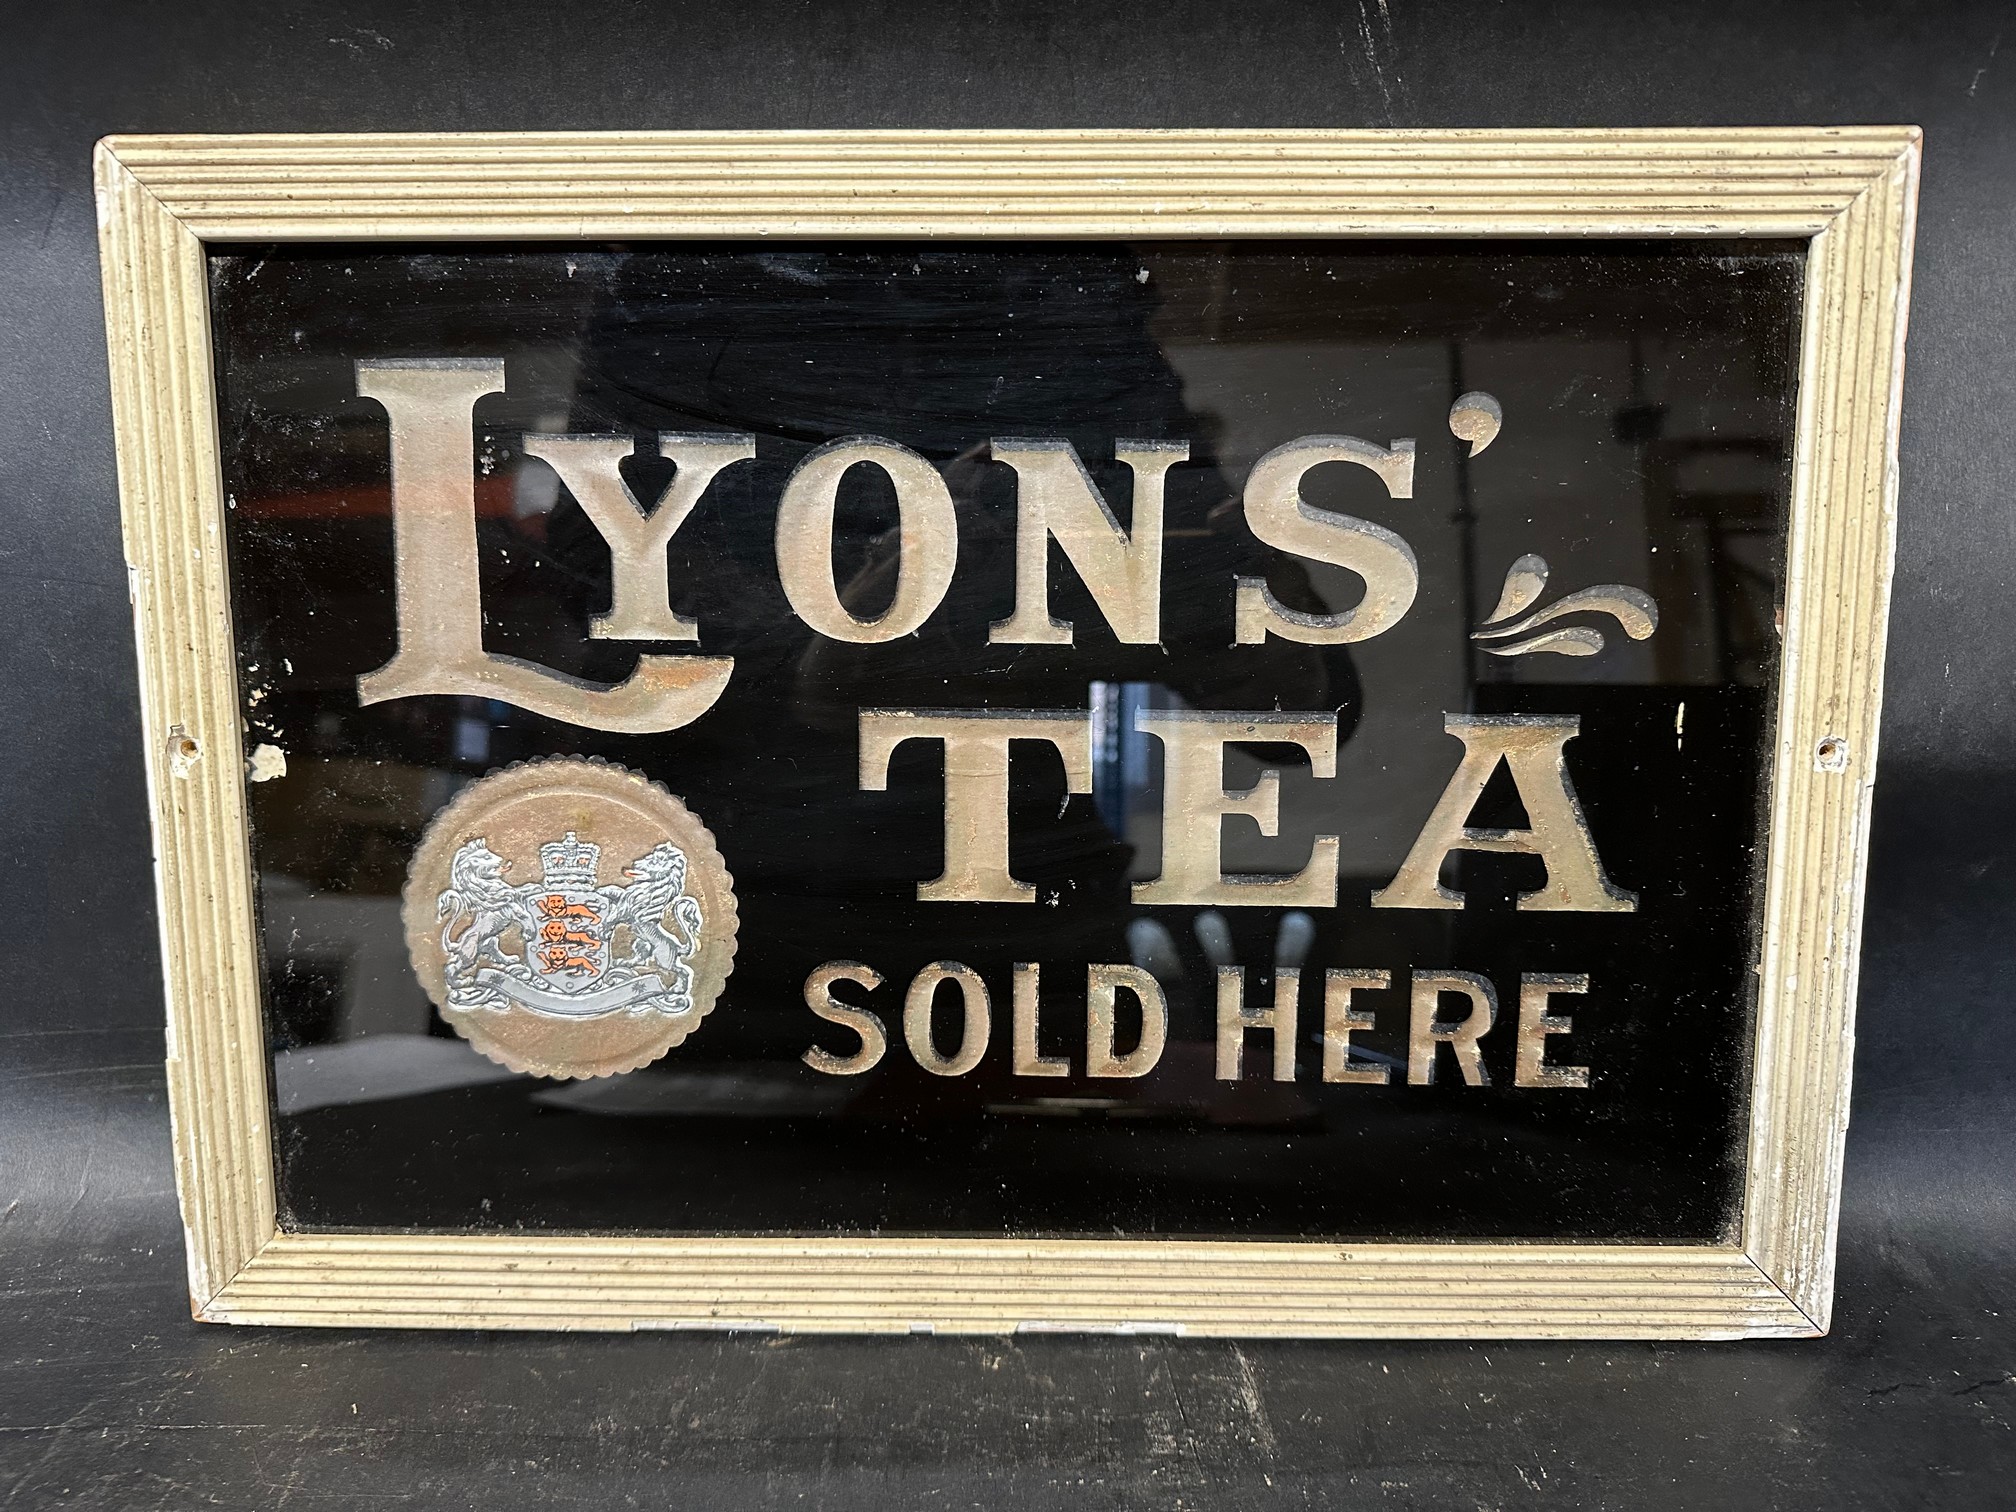 A Lyons' Tea Sold Here glass advertising sign, framed, 16 1/2 x 11 1/2".